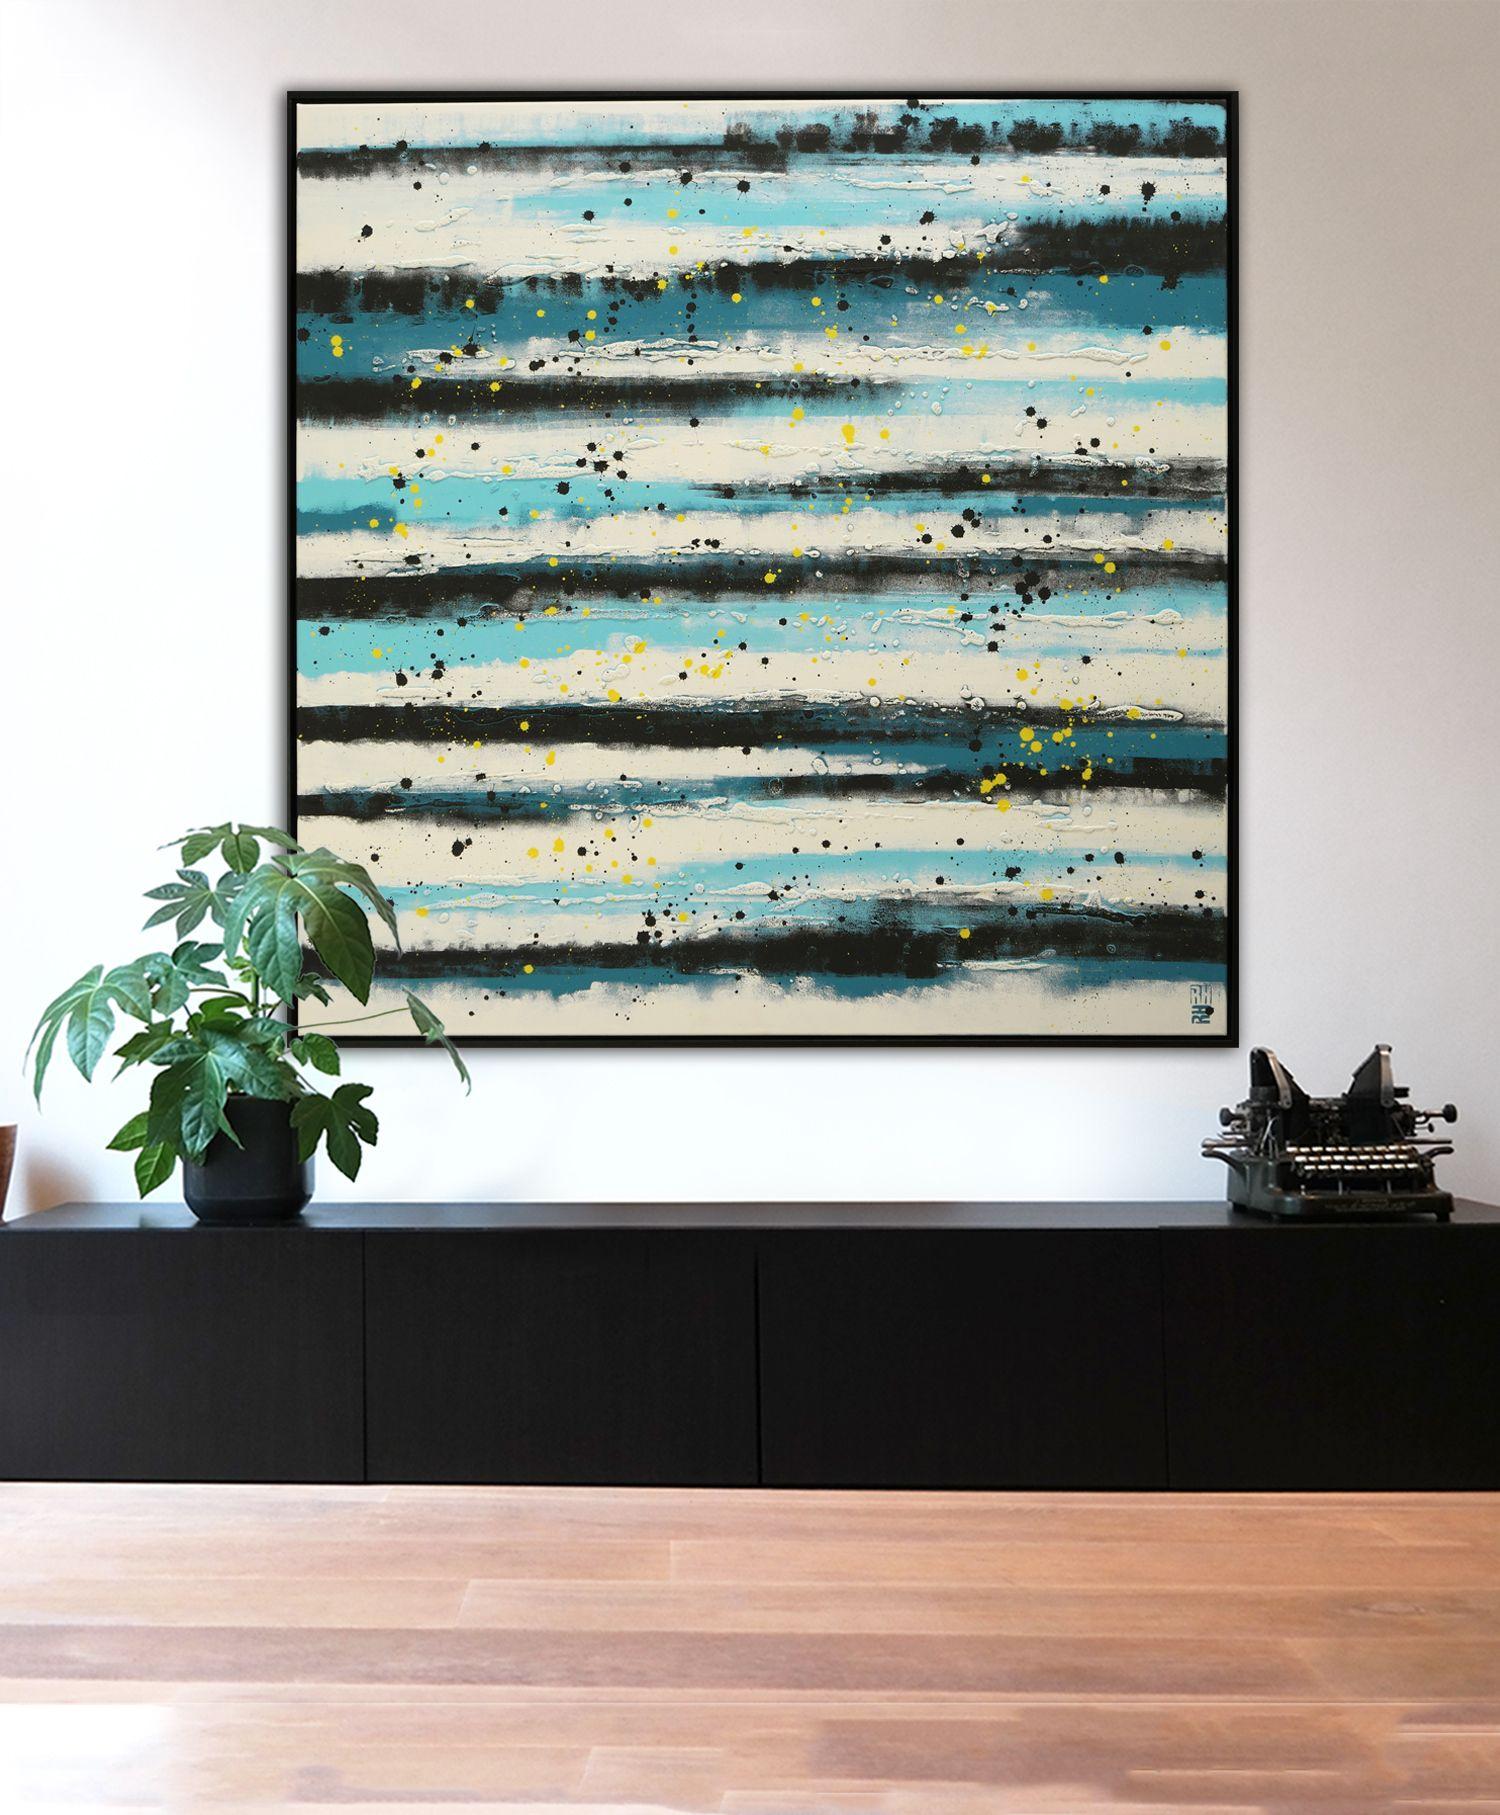 Acrylic Abstract Painting, Original artwork created by Ronald Hunter.    A touch of color to warm up your home. For this painting I have combined a stylish off-white (or pale beige) with blue and black undertones. The yellow splatters bring a